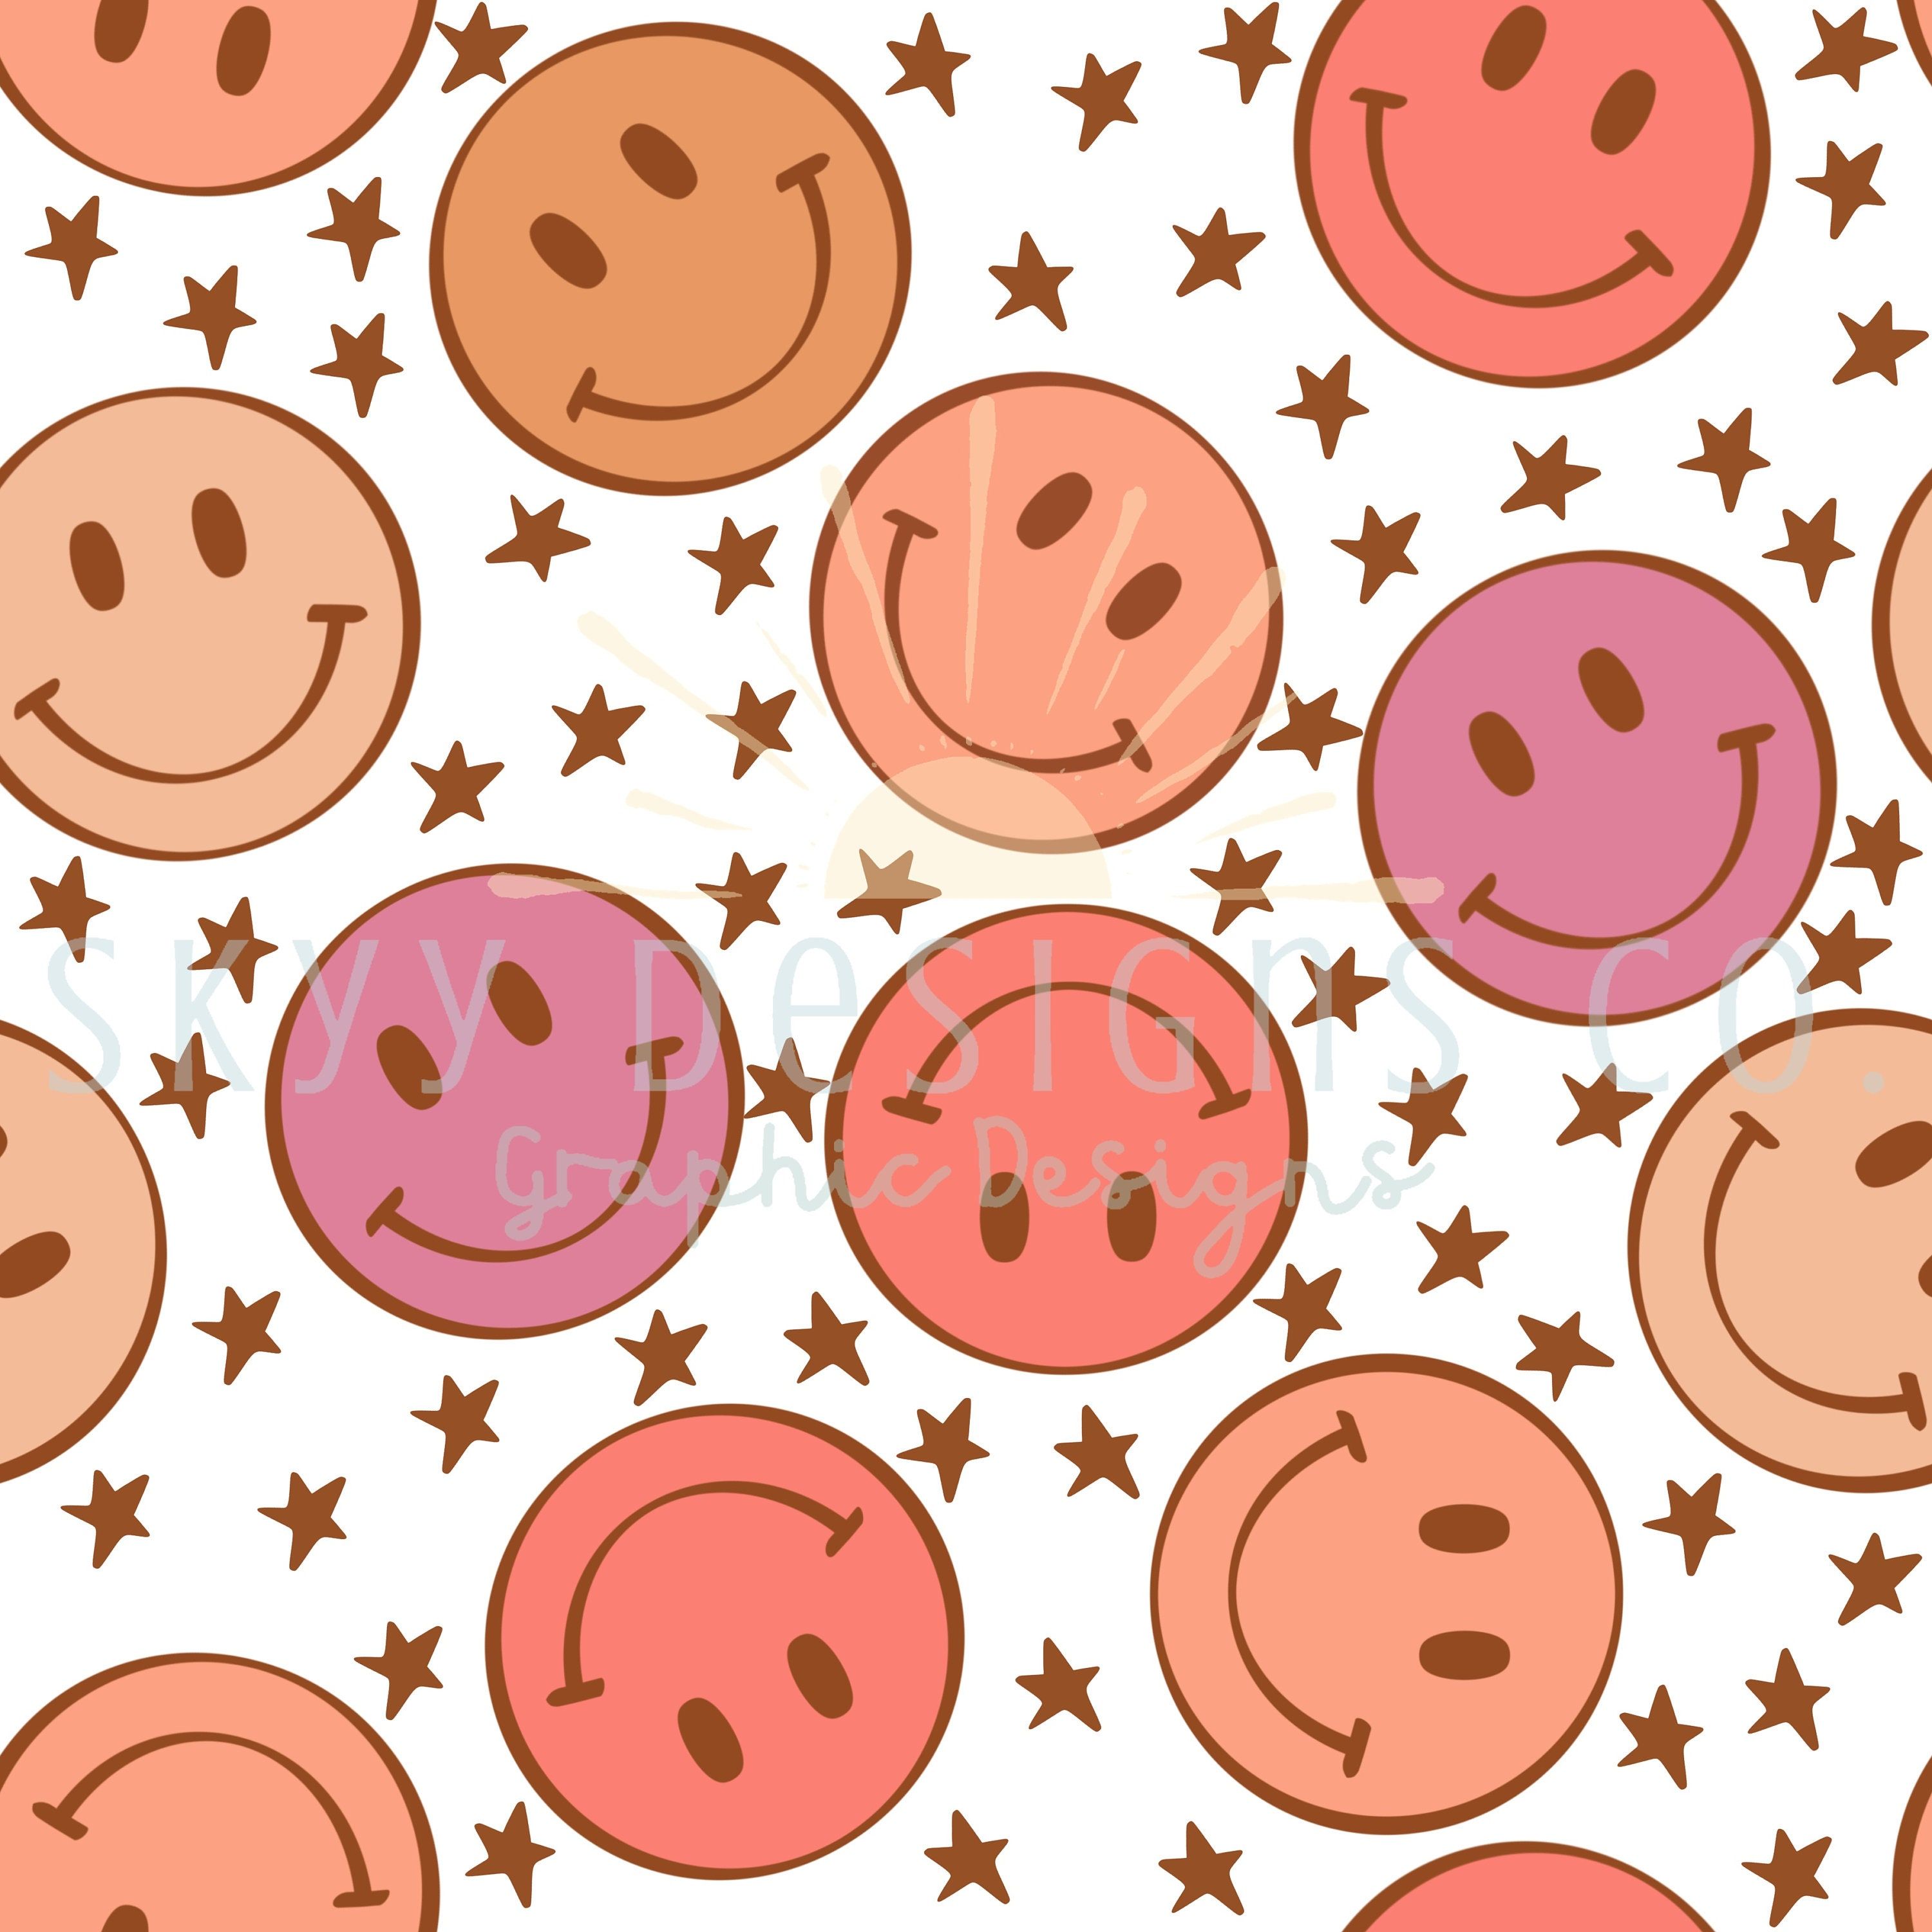 Download Free 100 + smiley face wallpaper